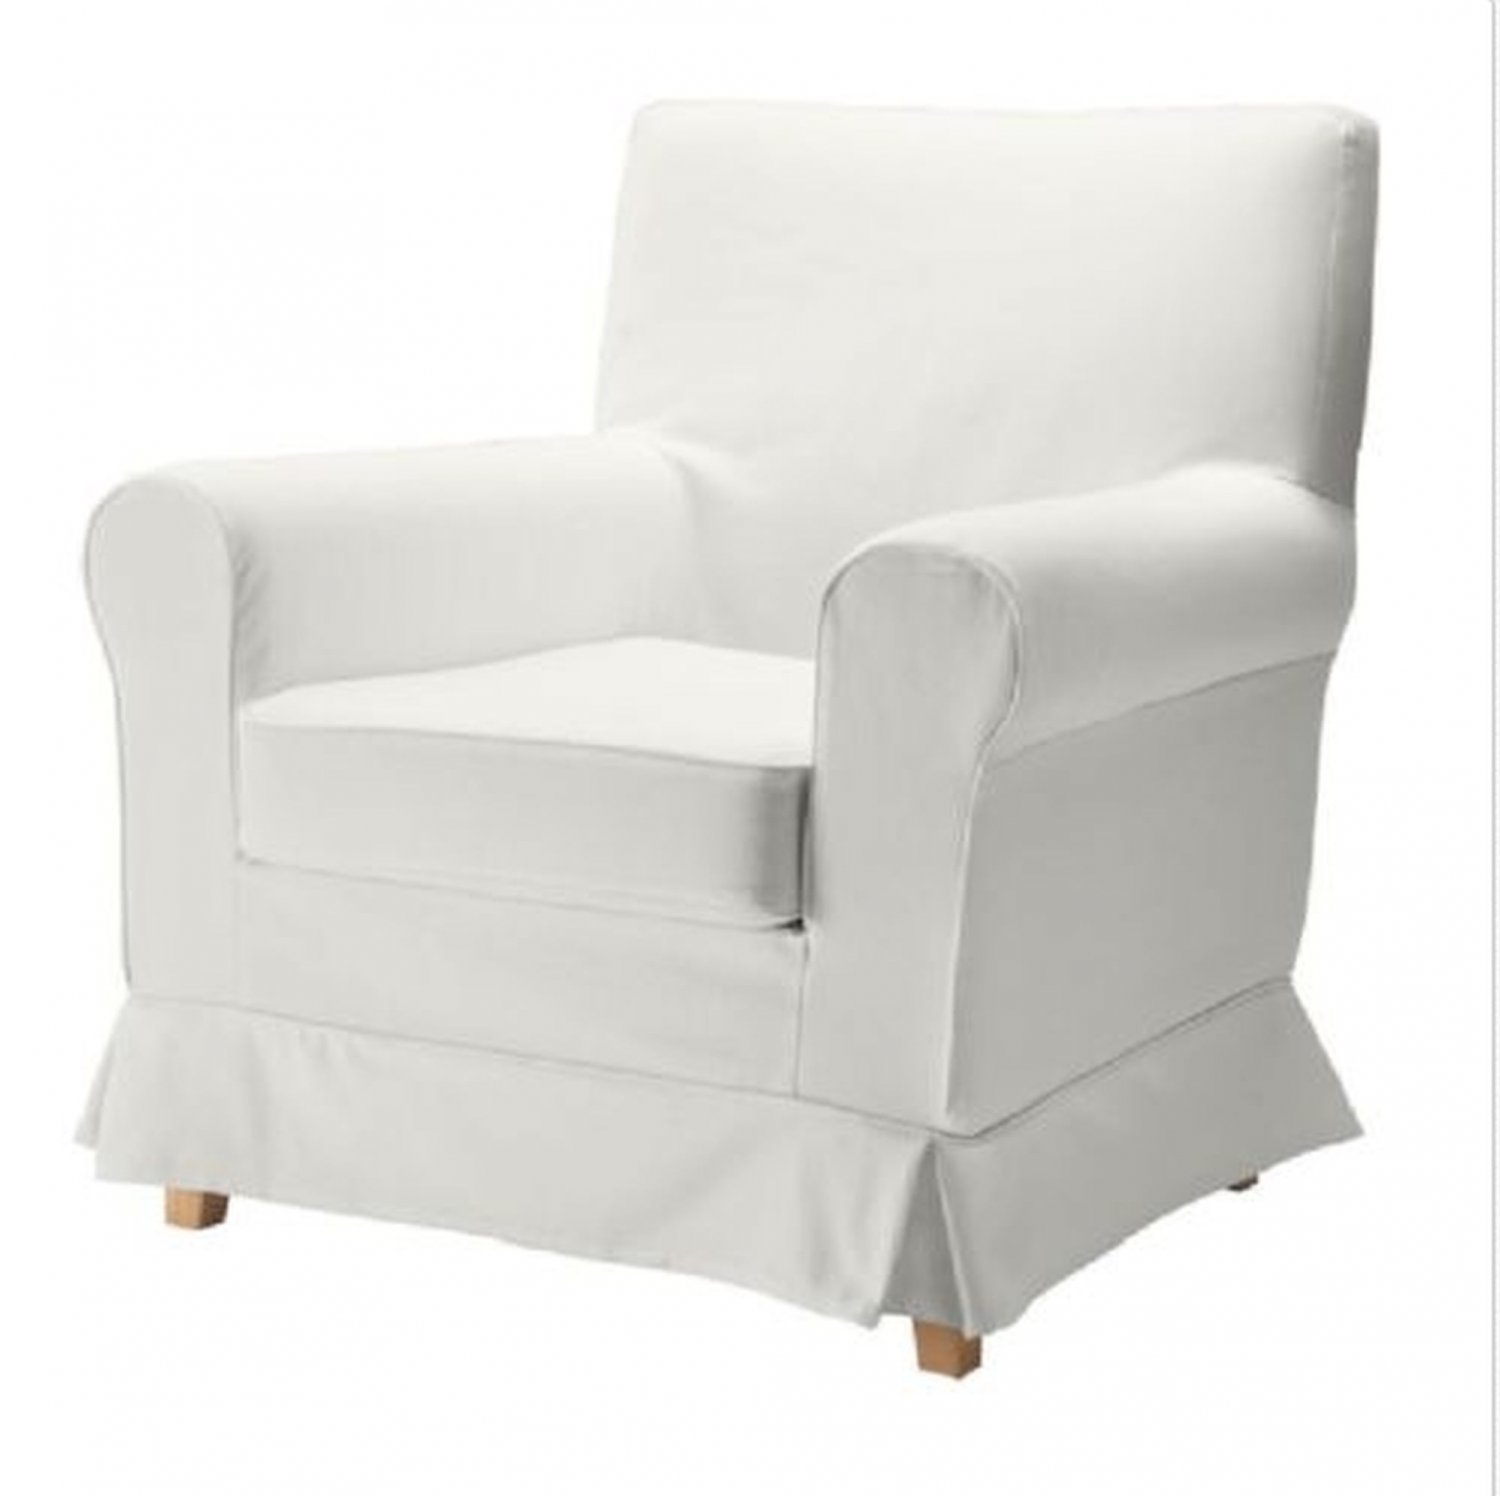 Simple White Ikea Chair Covers for Large Space